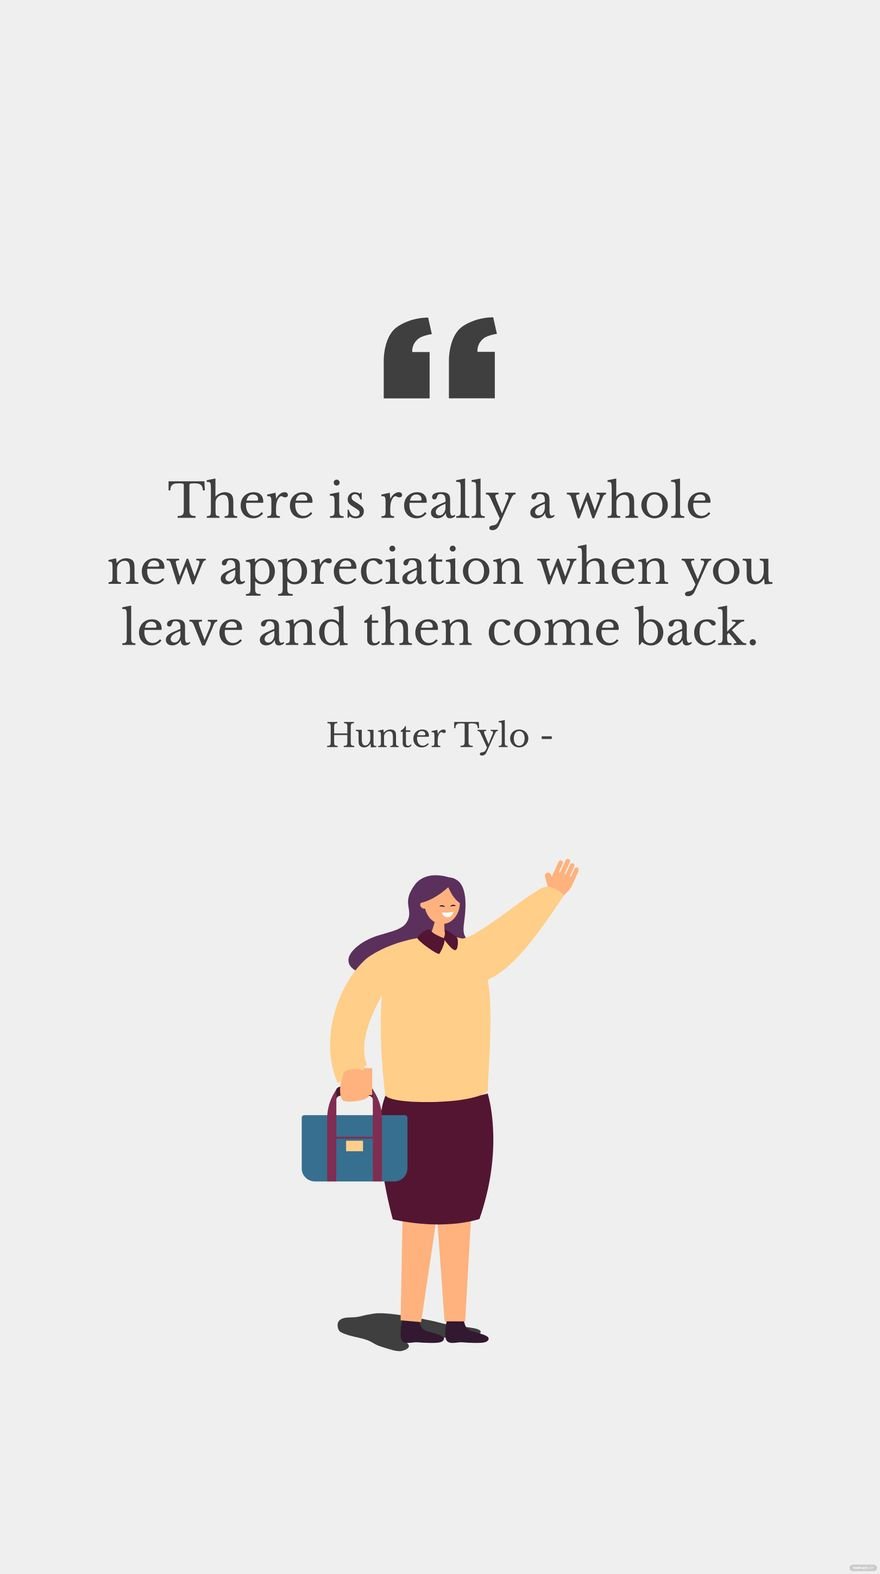 Hunter Tylo - There is really a whole new appreciation when you leave and then come back. in JPG